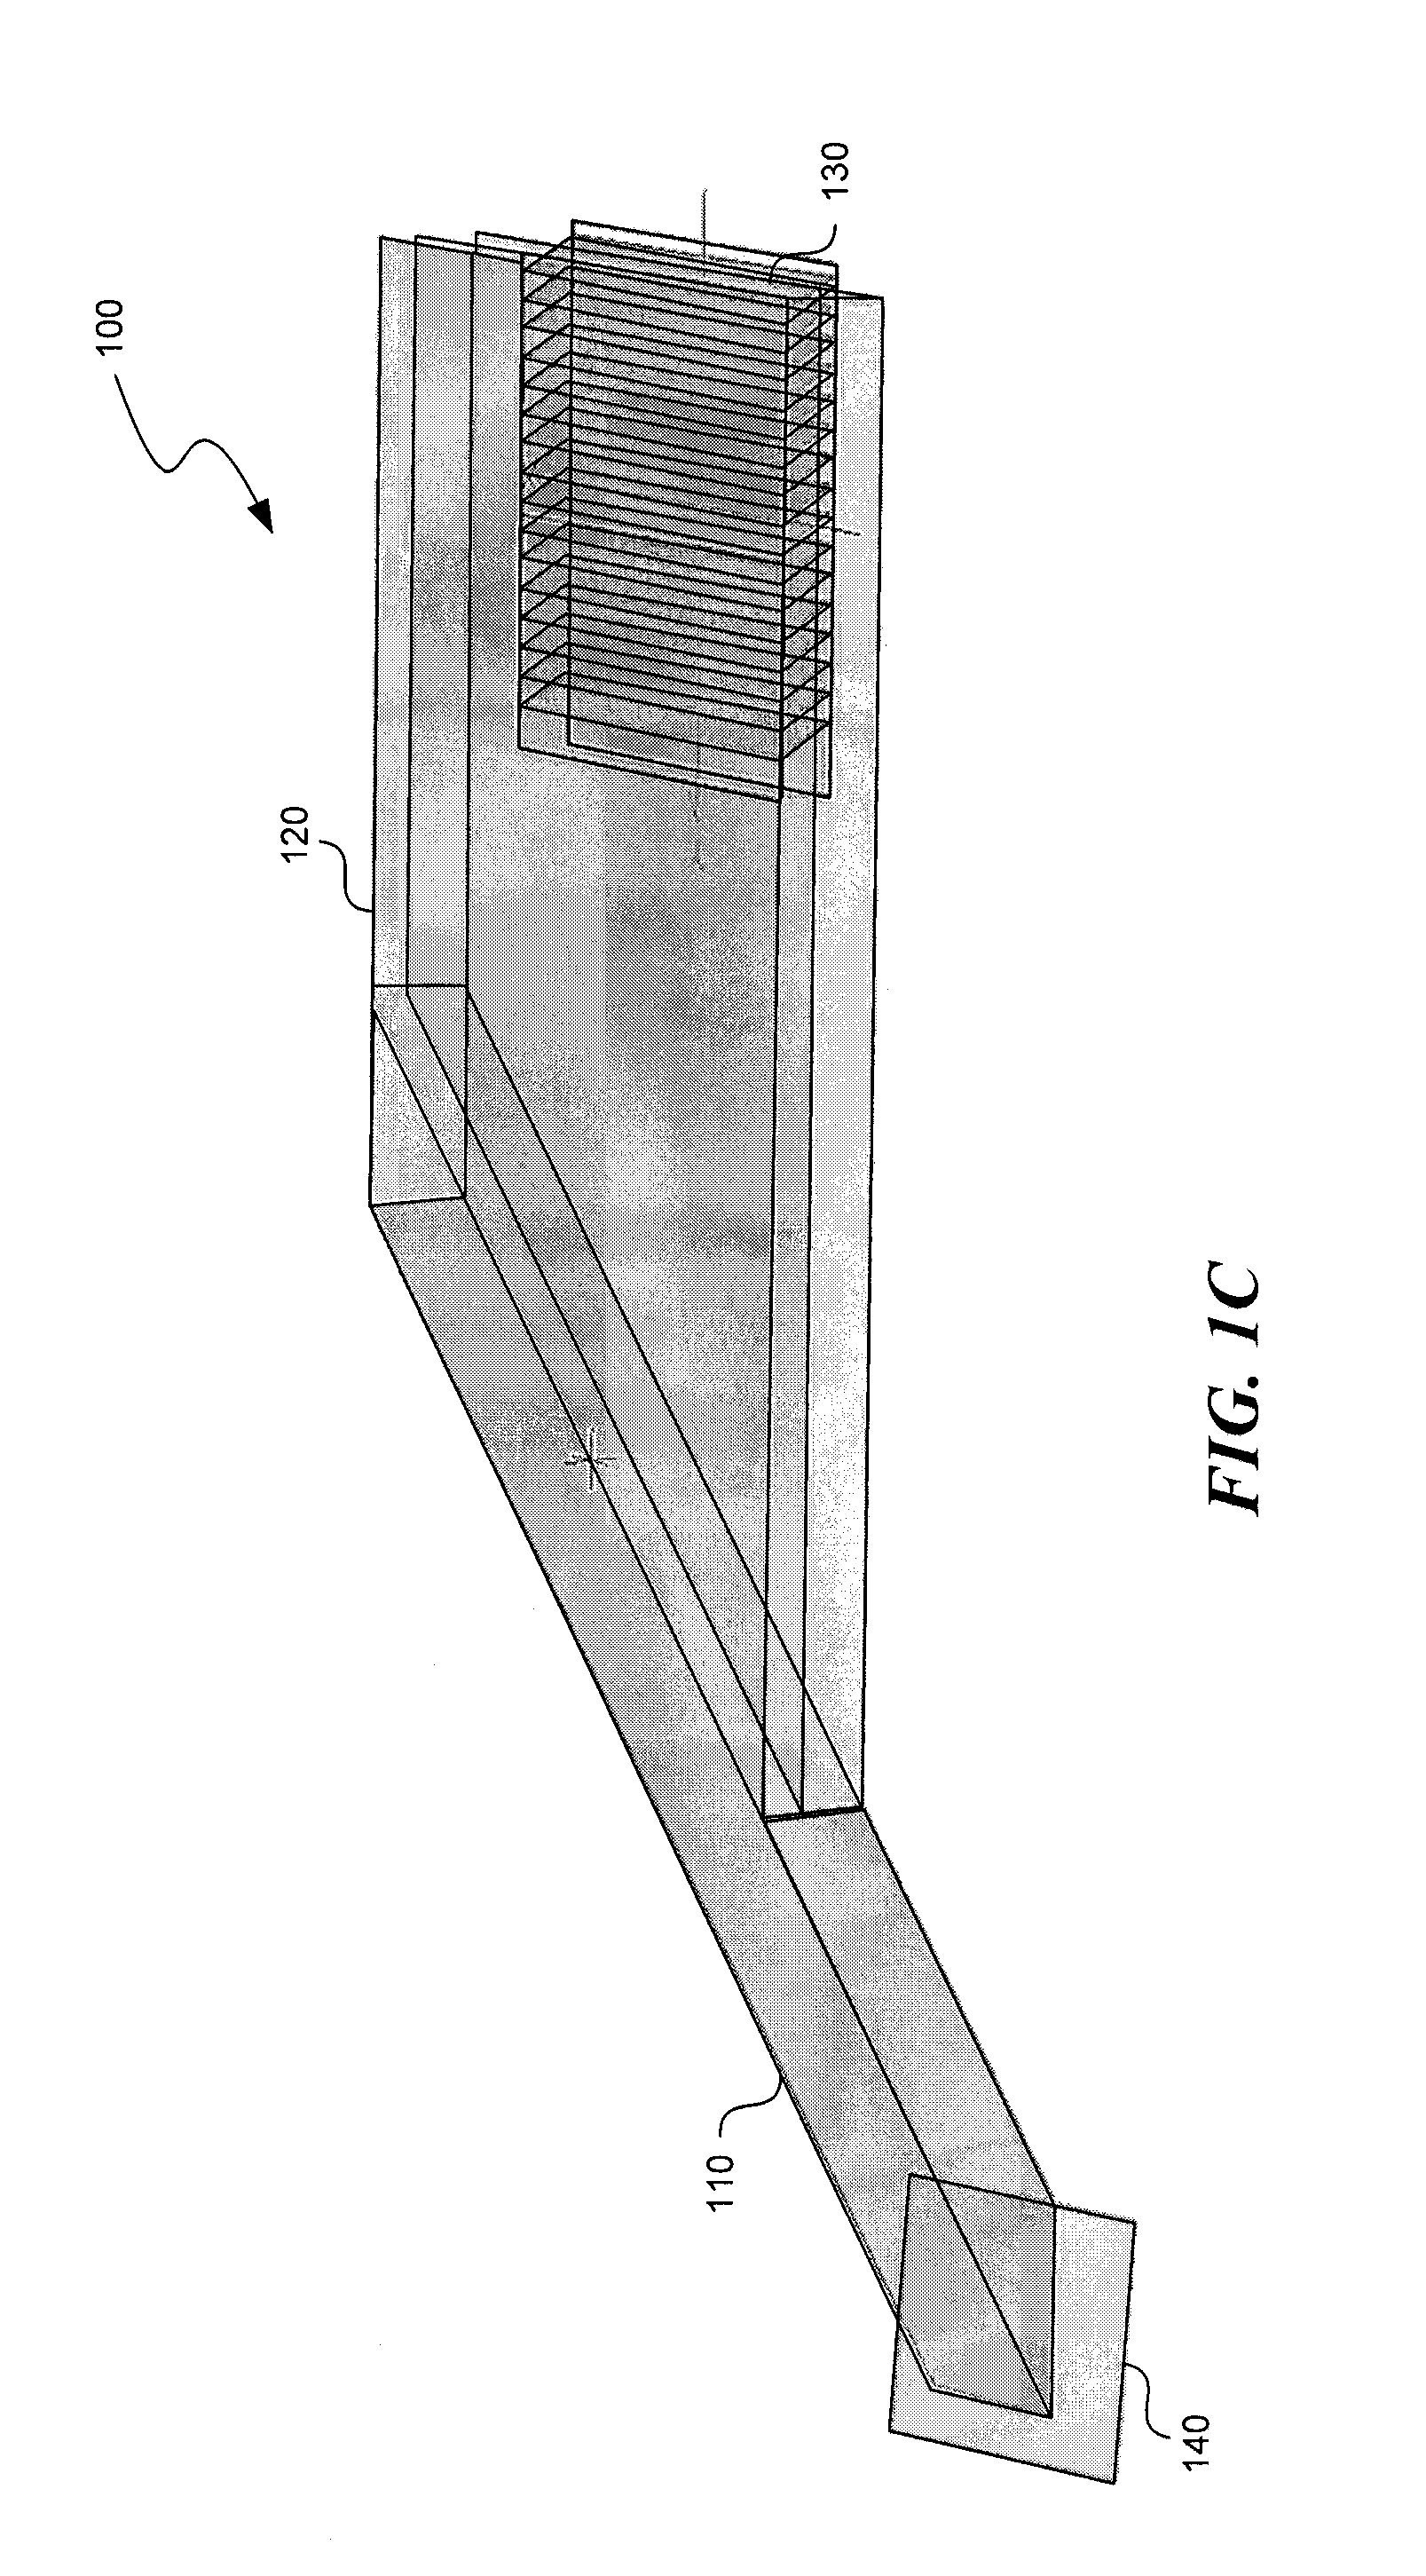 Substrate-guided relays for use with scanned beam light sources